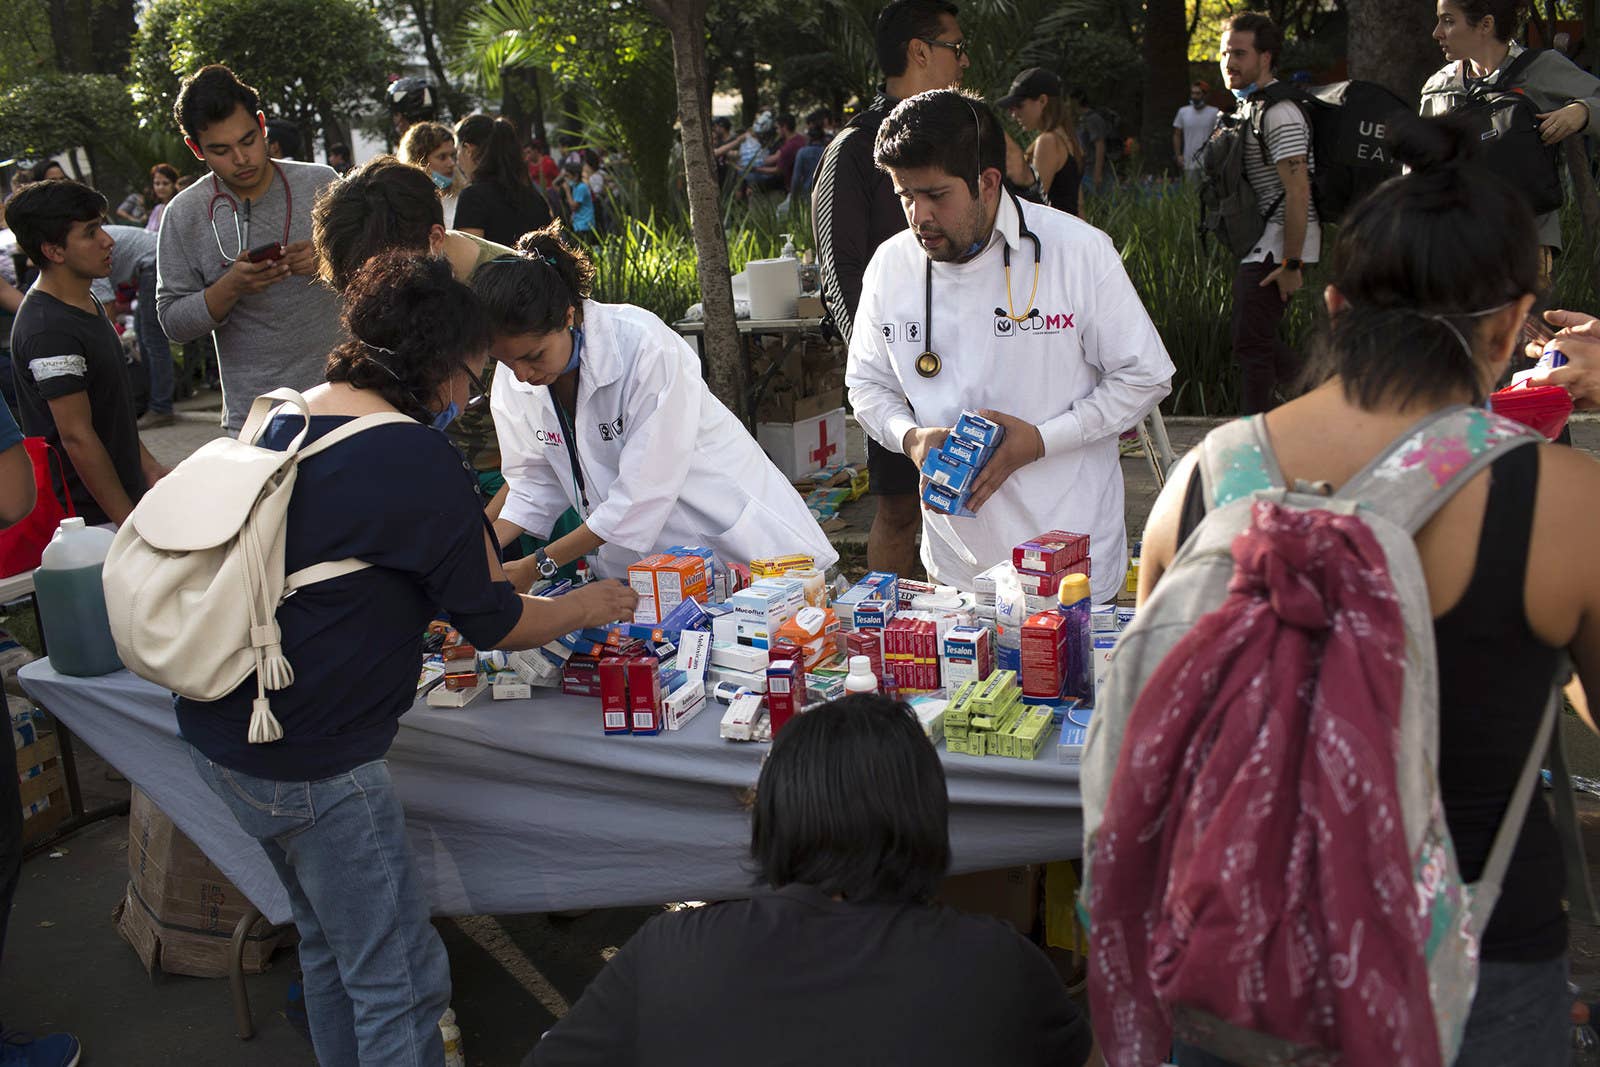 Medical personnel organize supplies in Mexico City.